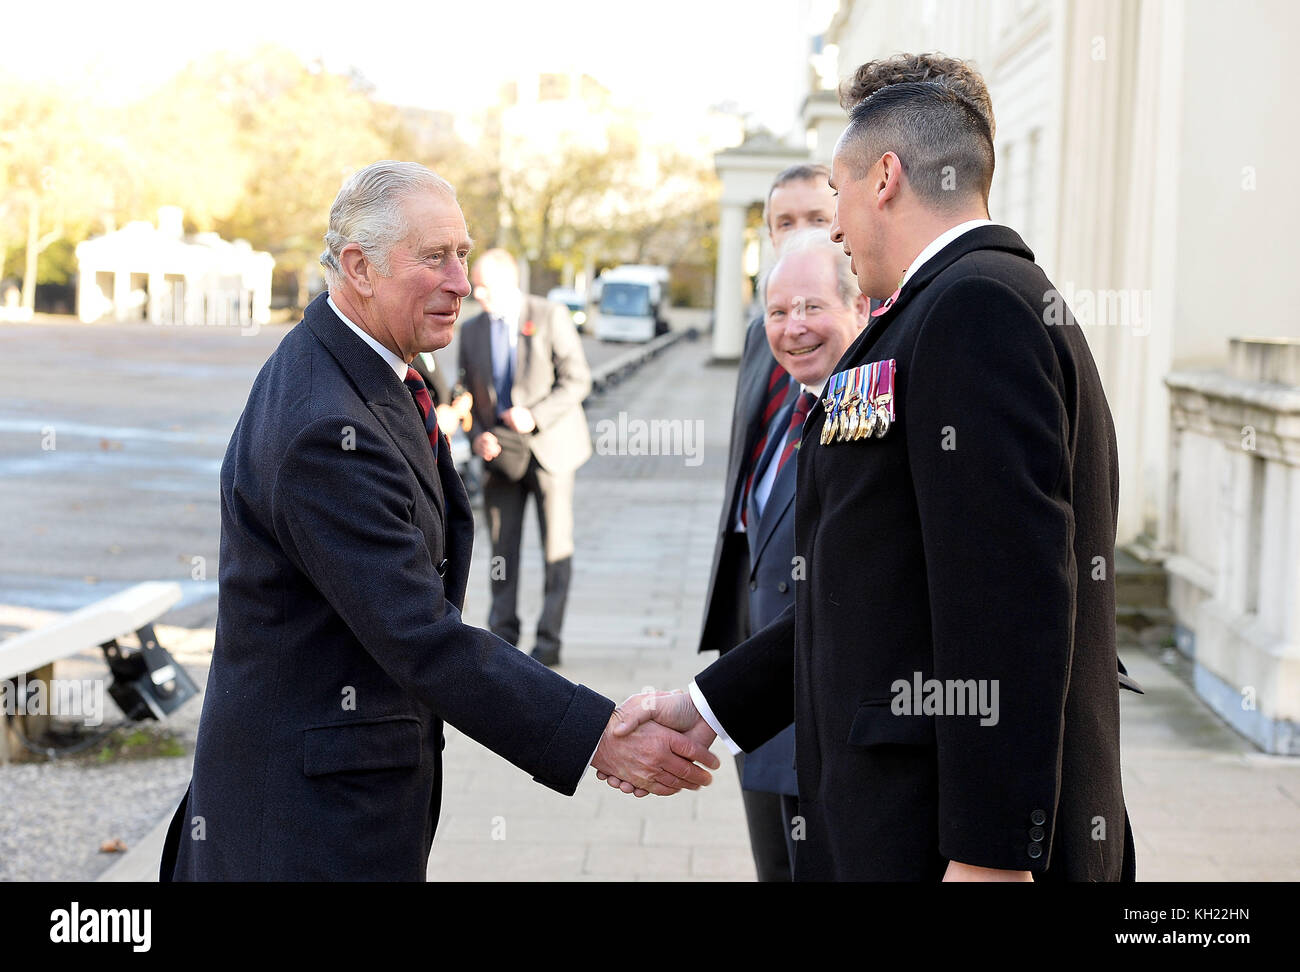 The Prince of Wales (left) is greeted by Colonel Tom Bonas and WSM Dean Morgan as he arrives at the Guards' Memorial at the Guards' Chapel, Wellington Barracks, London, for the Welsh Guards' Regimental Remembrance Sunday. Stock Photo